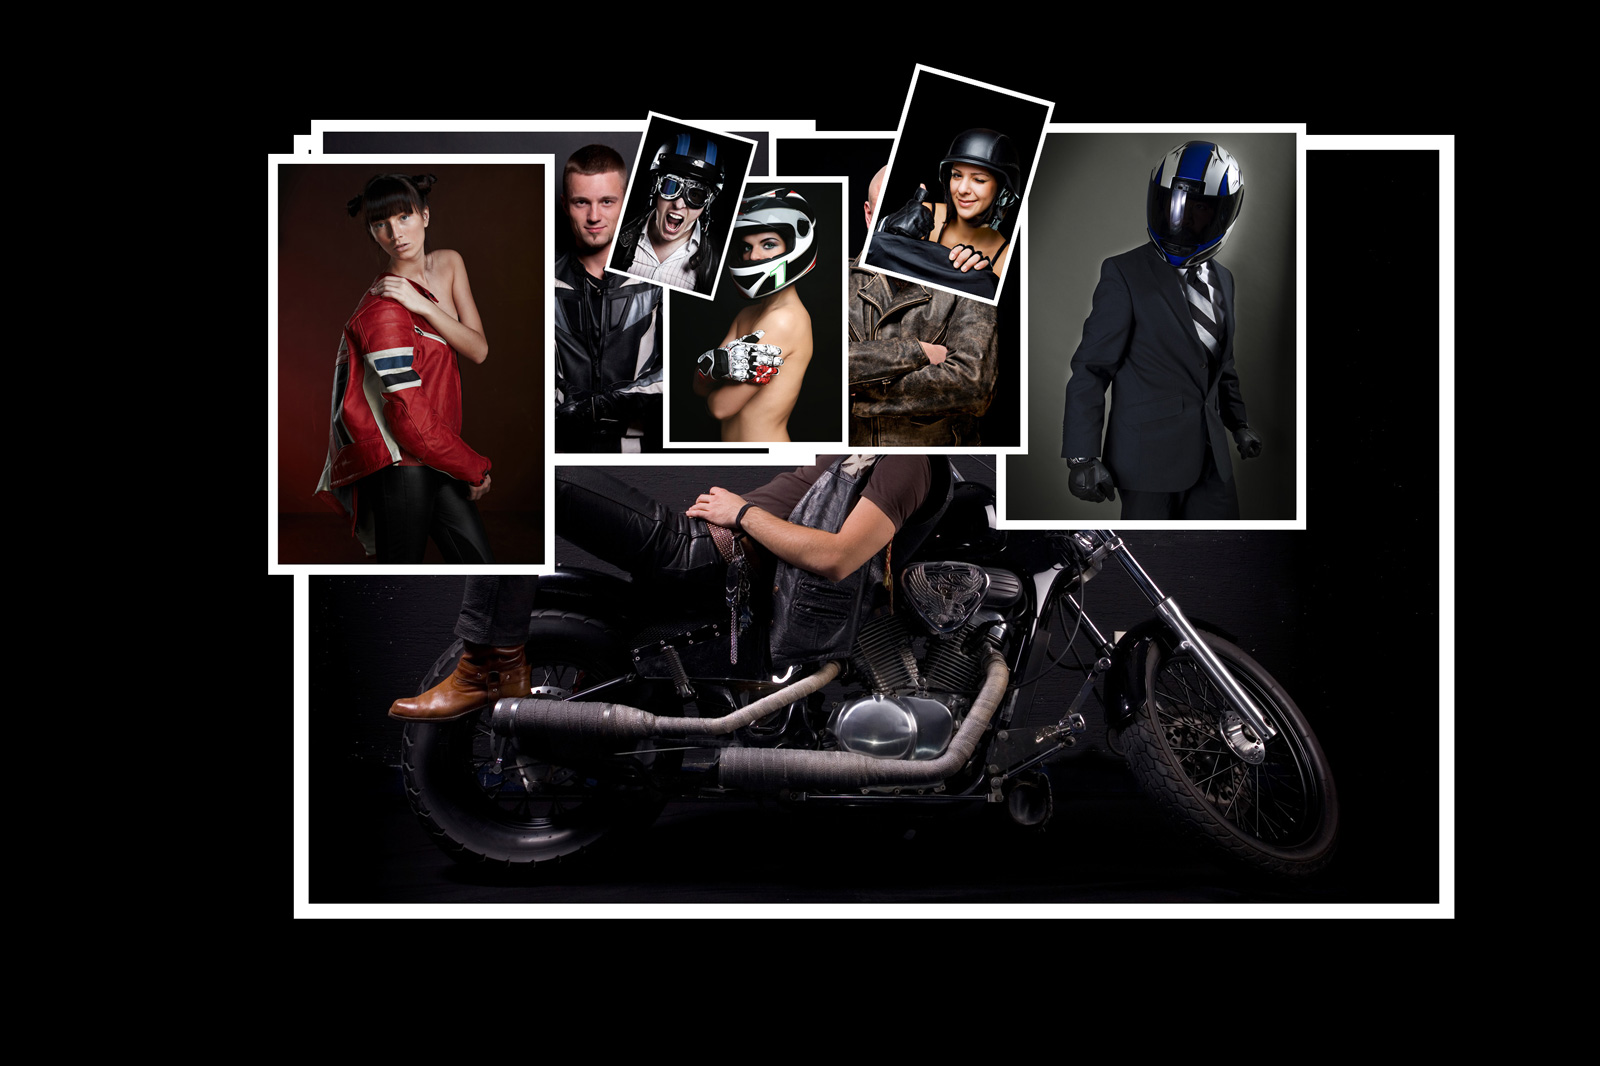 Image manipulation - bikers campaign 1 collated photos